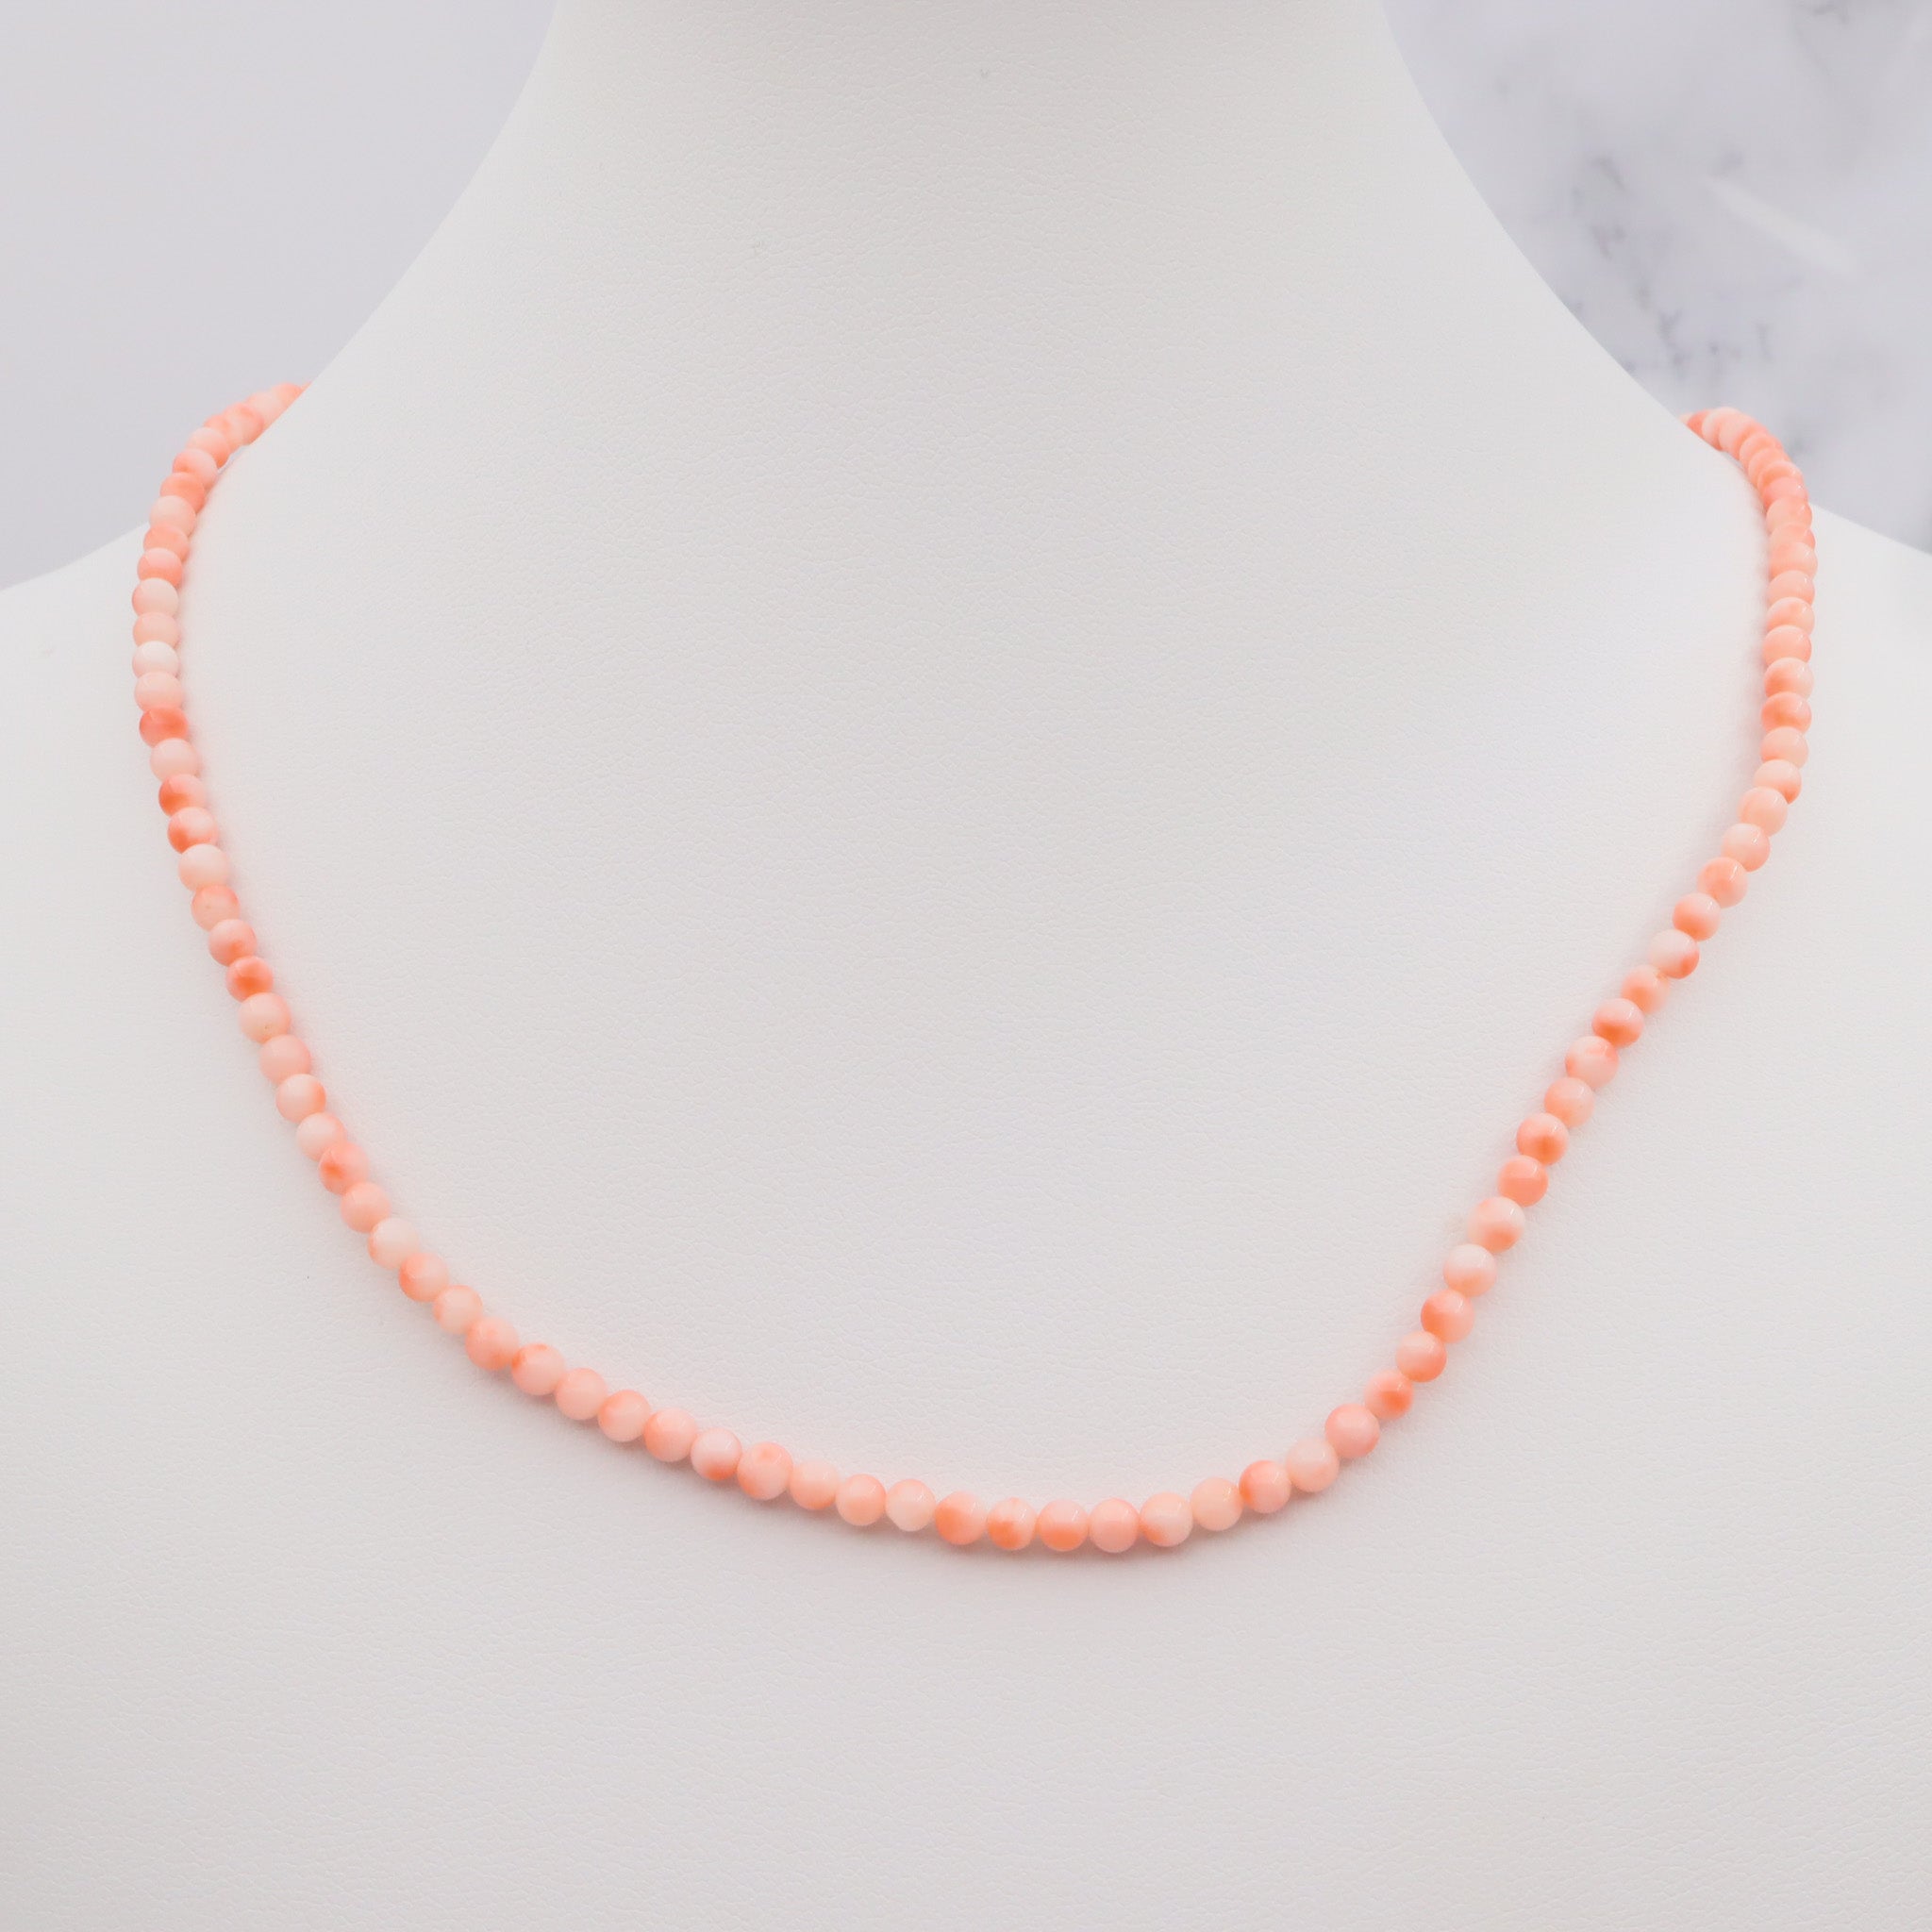 Antique 3.5 mm Angel Skin Coral Bead Necklace - 16 Inches